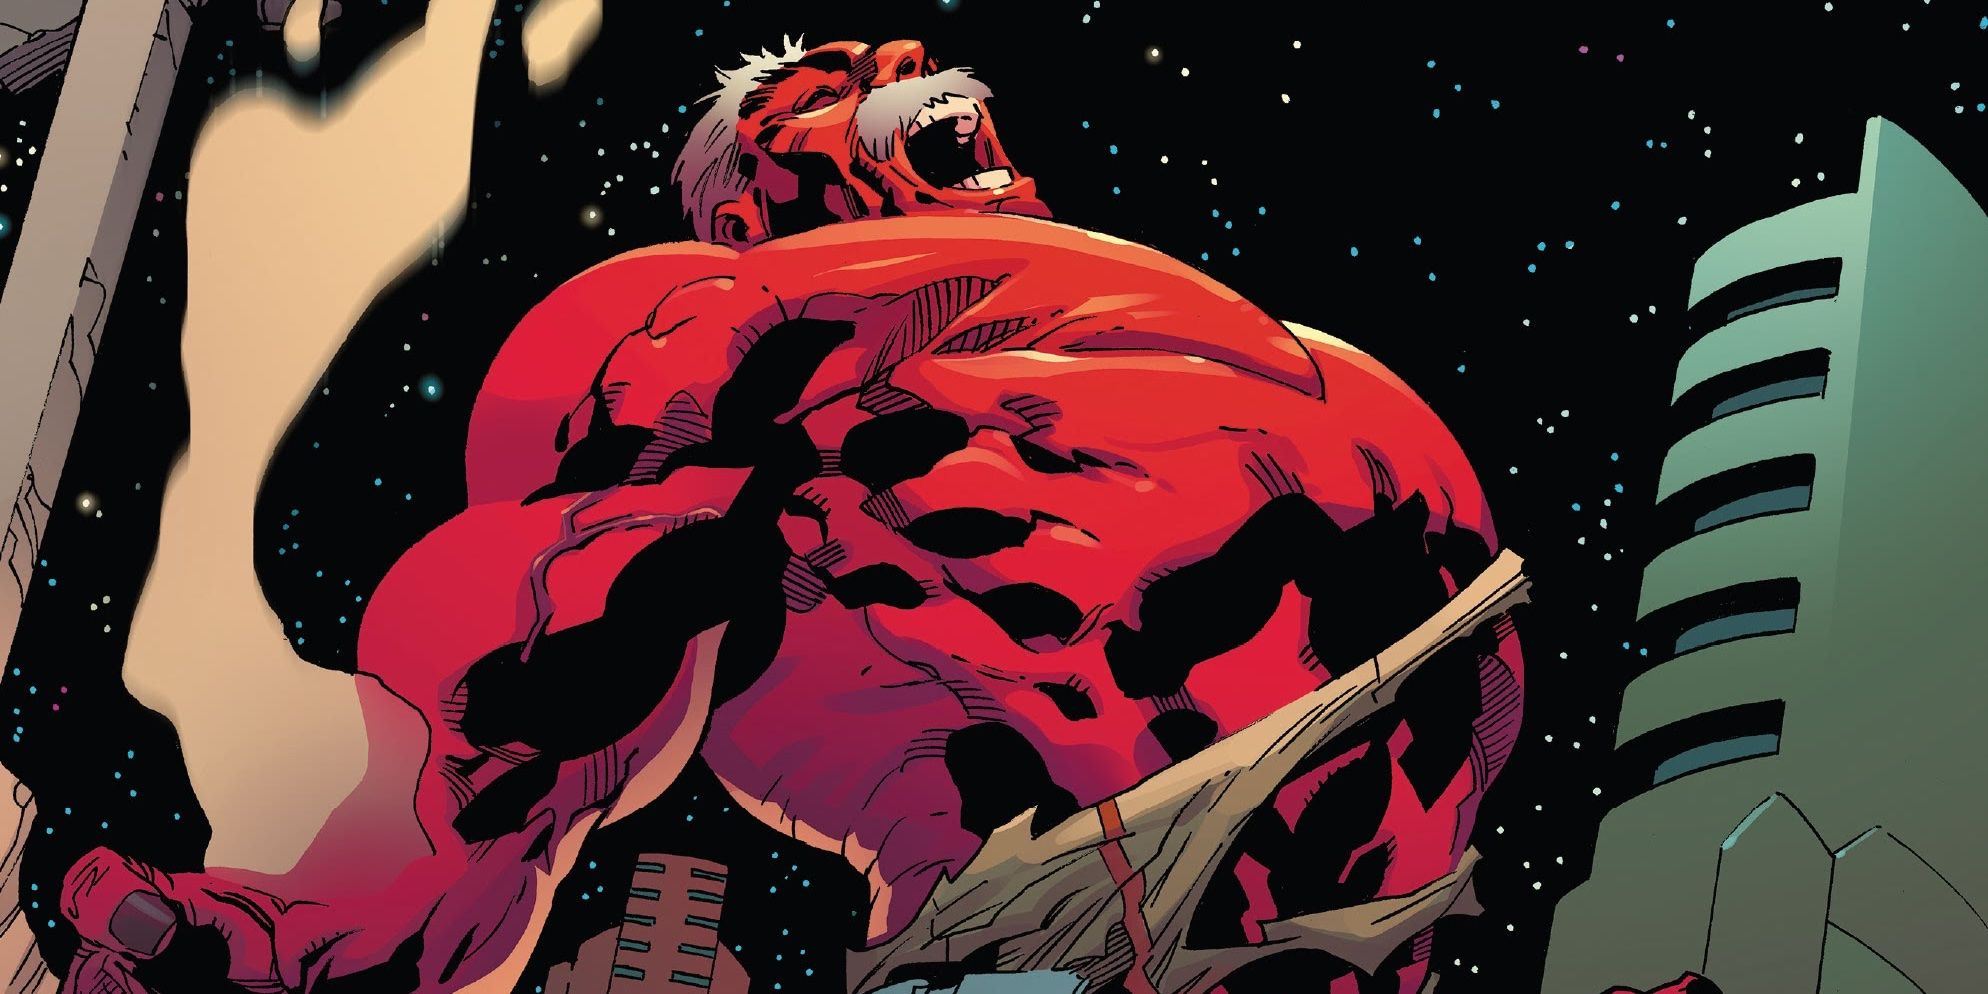 Red Hulk hulks out in Marvel Comics